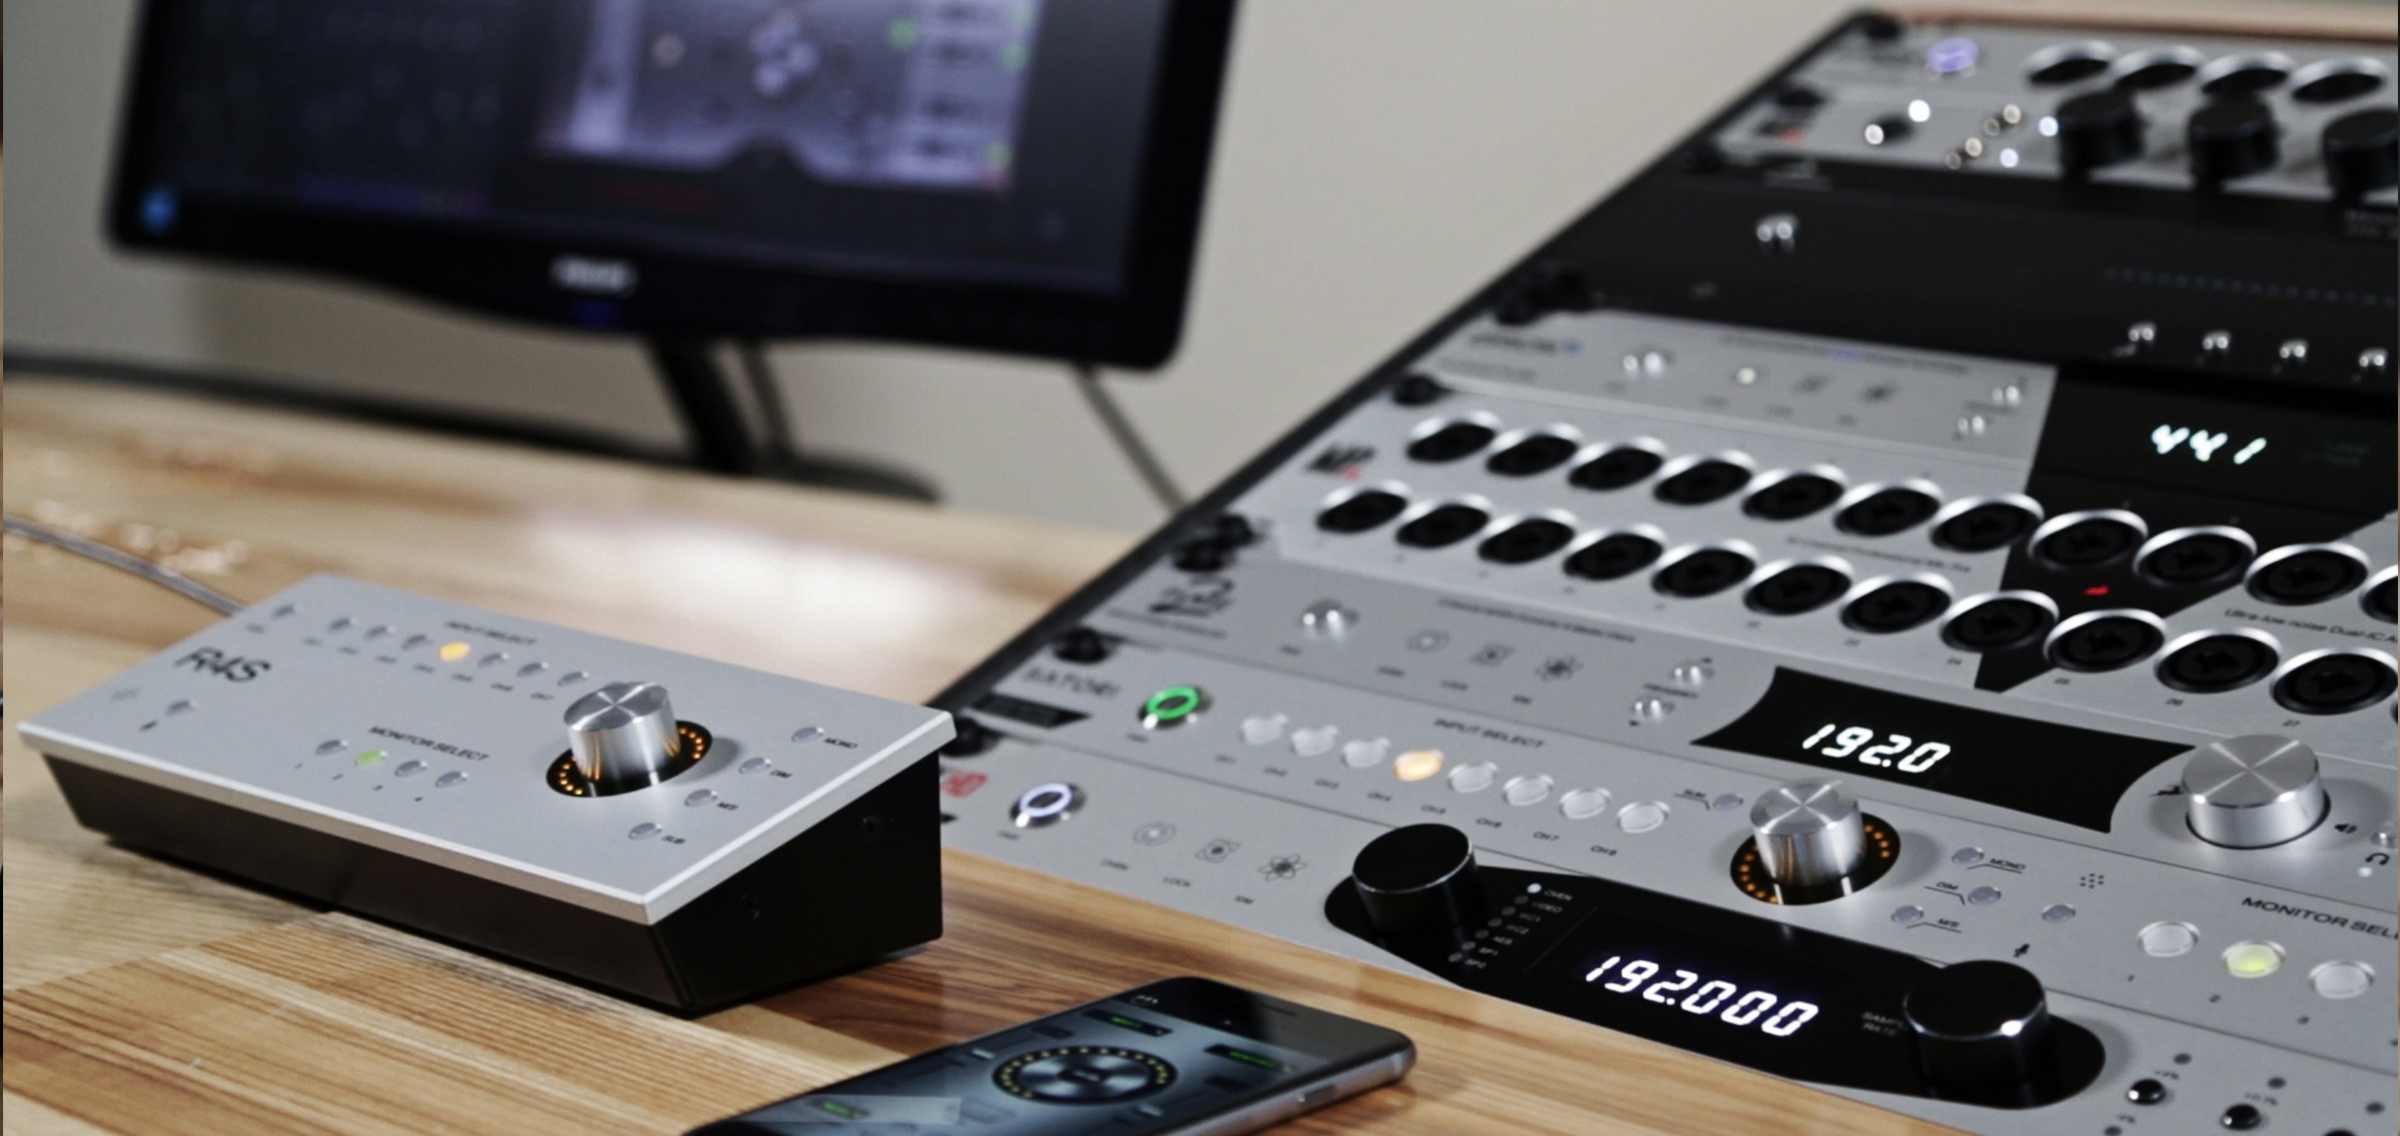 Antelope Audio Announces Special Winter Pricing on Award-Winning Professional Audio Products